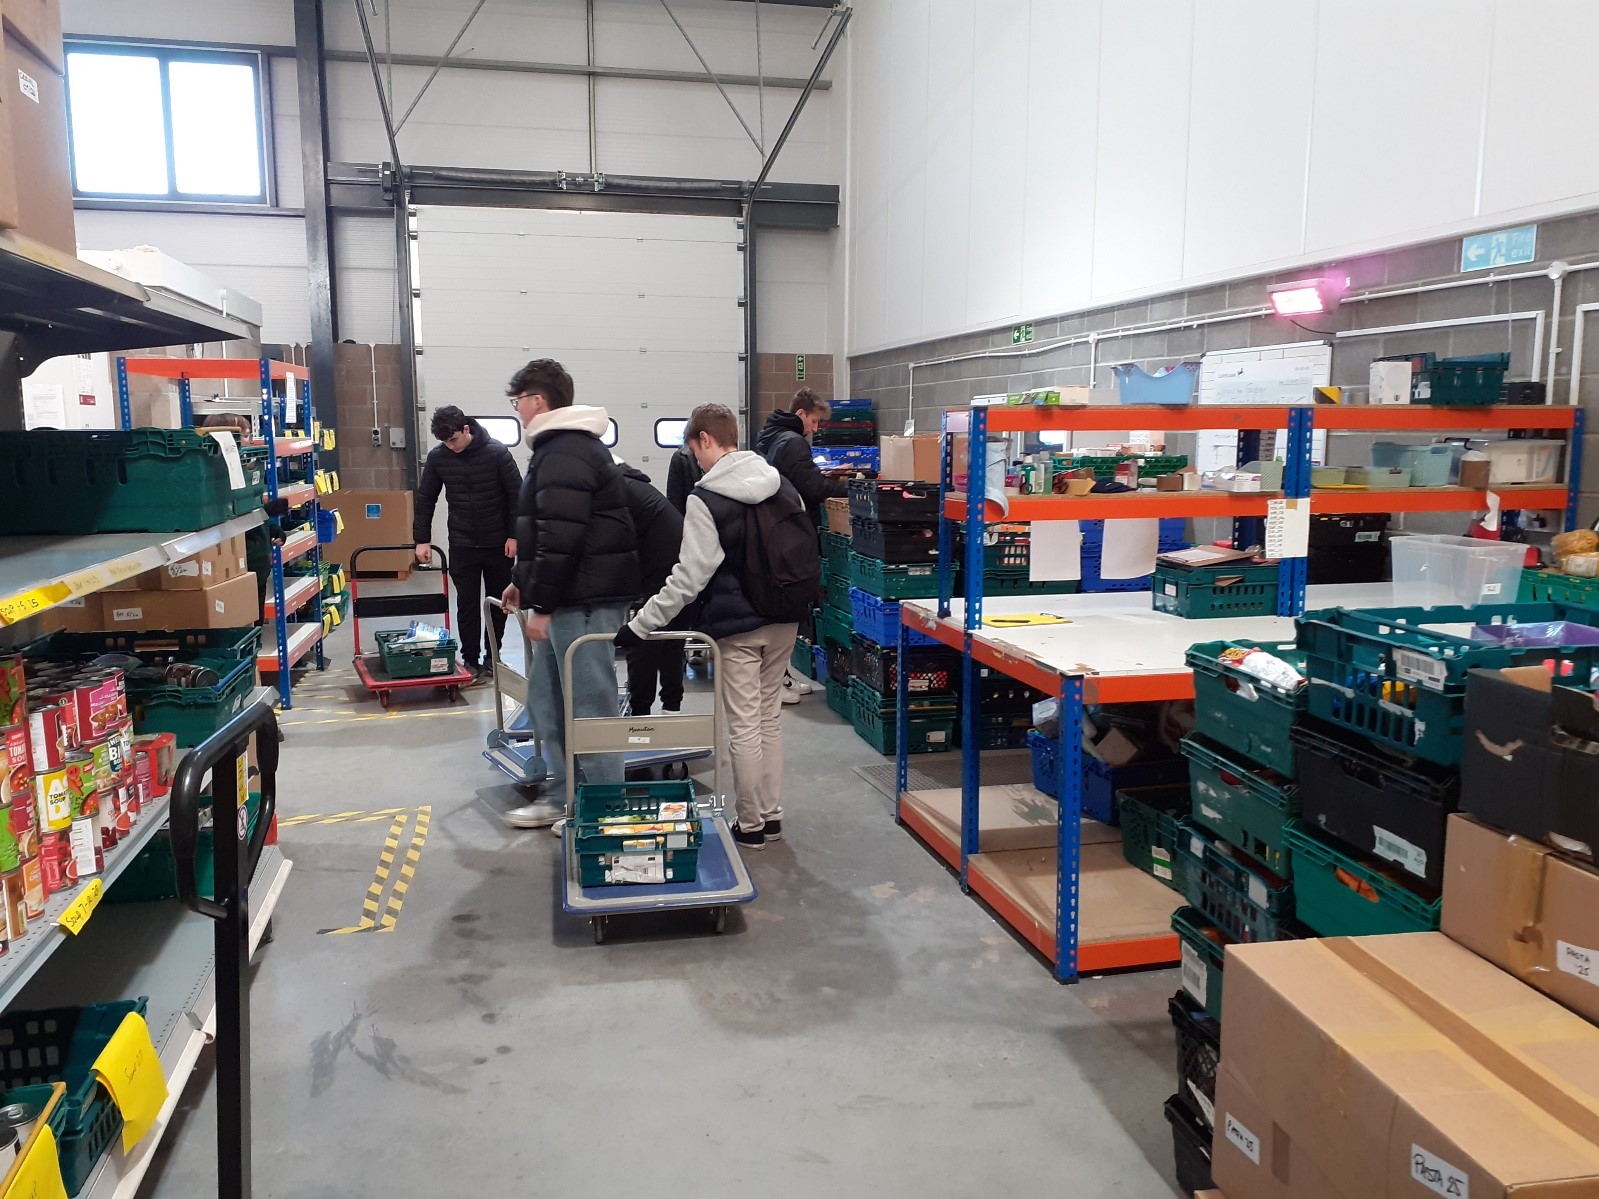 Learners moving trolleys with food around the warehouse